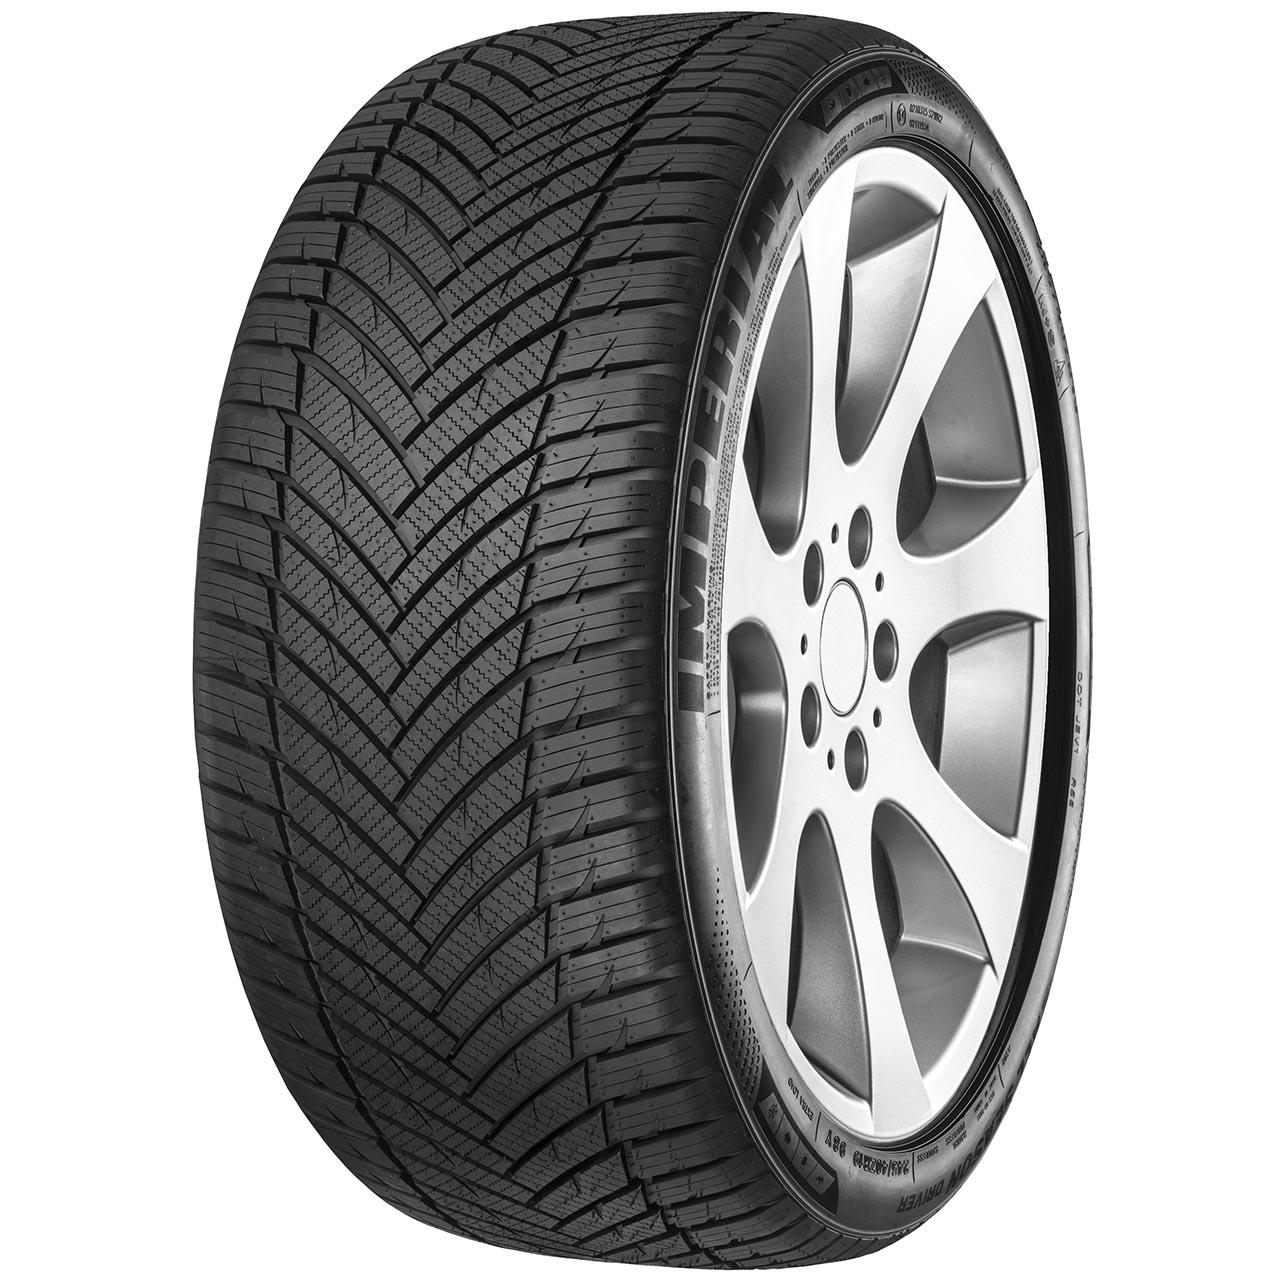 IMPERIAL AS DRIVER 205/55R16 91H